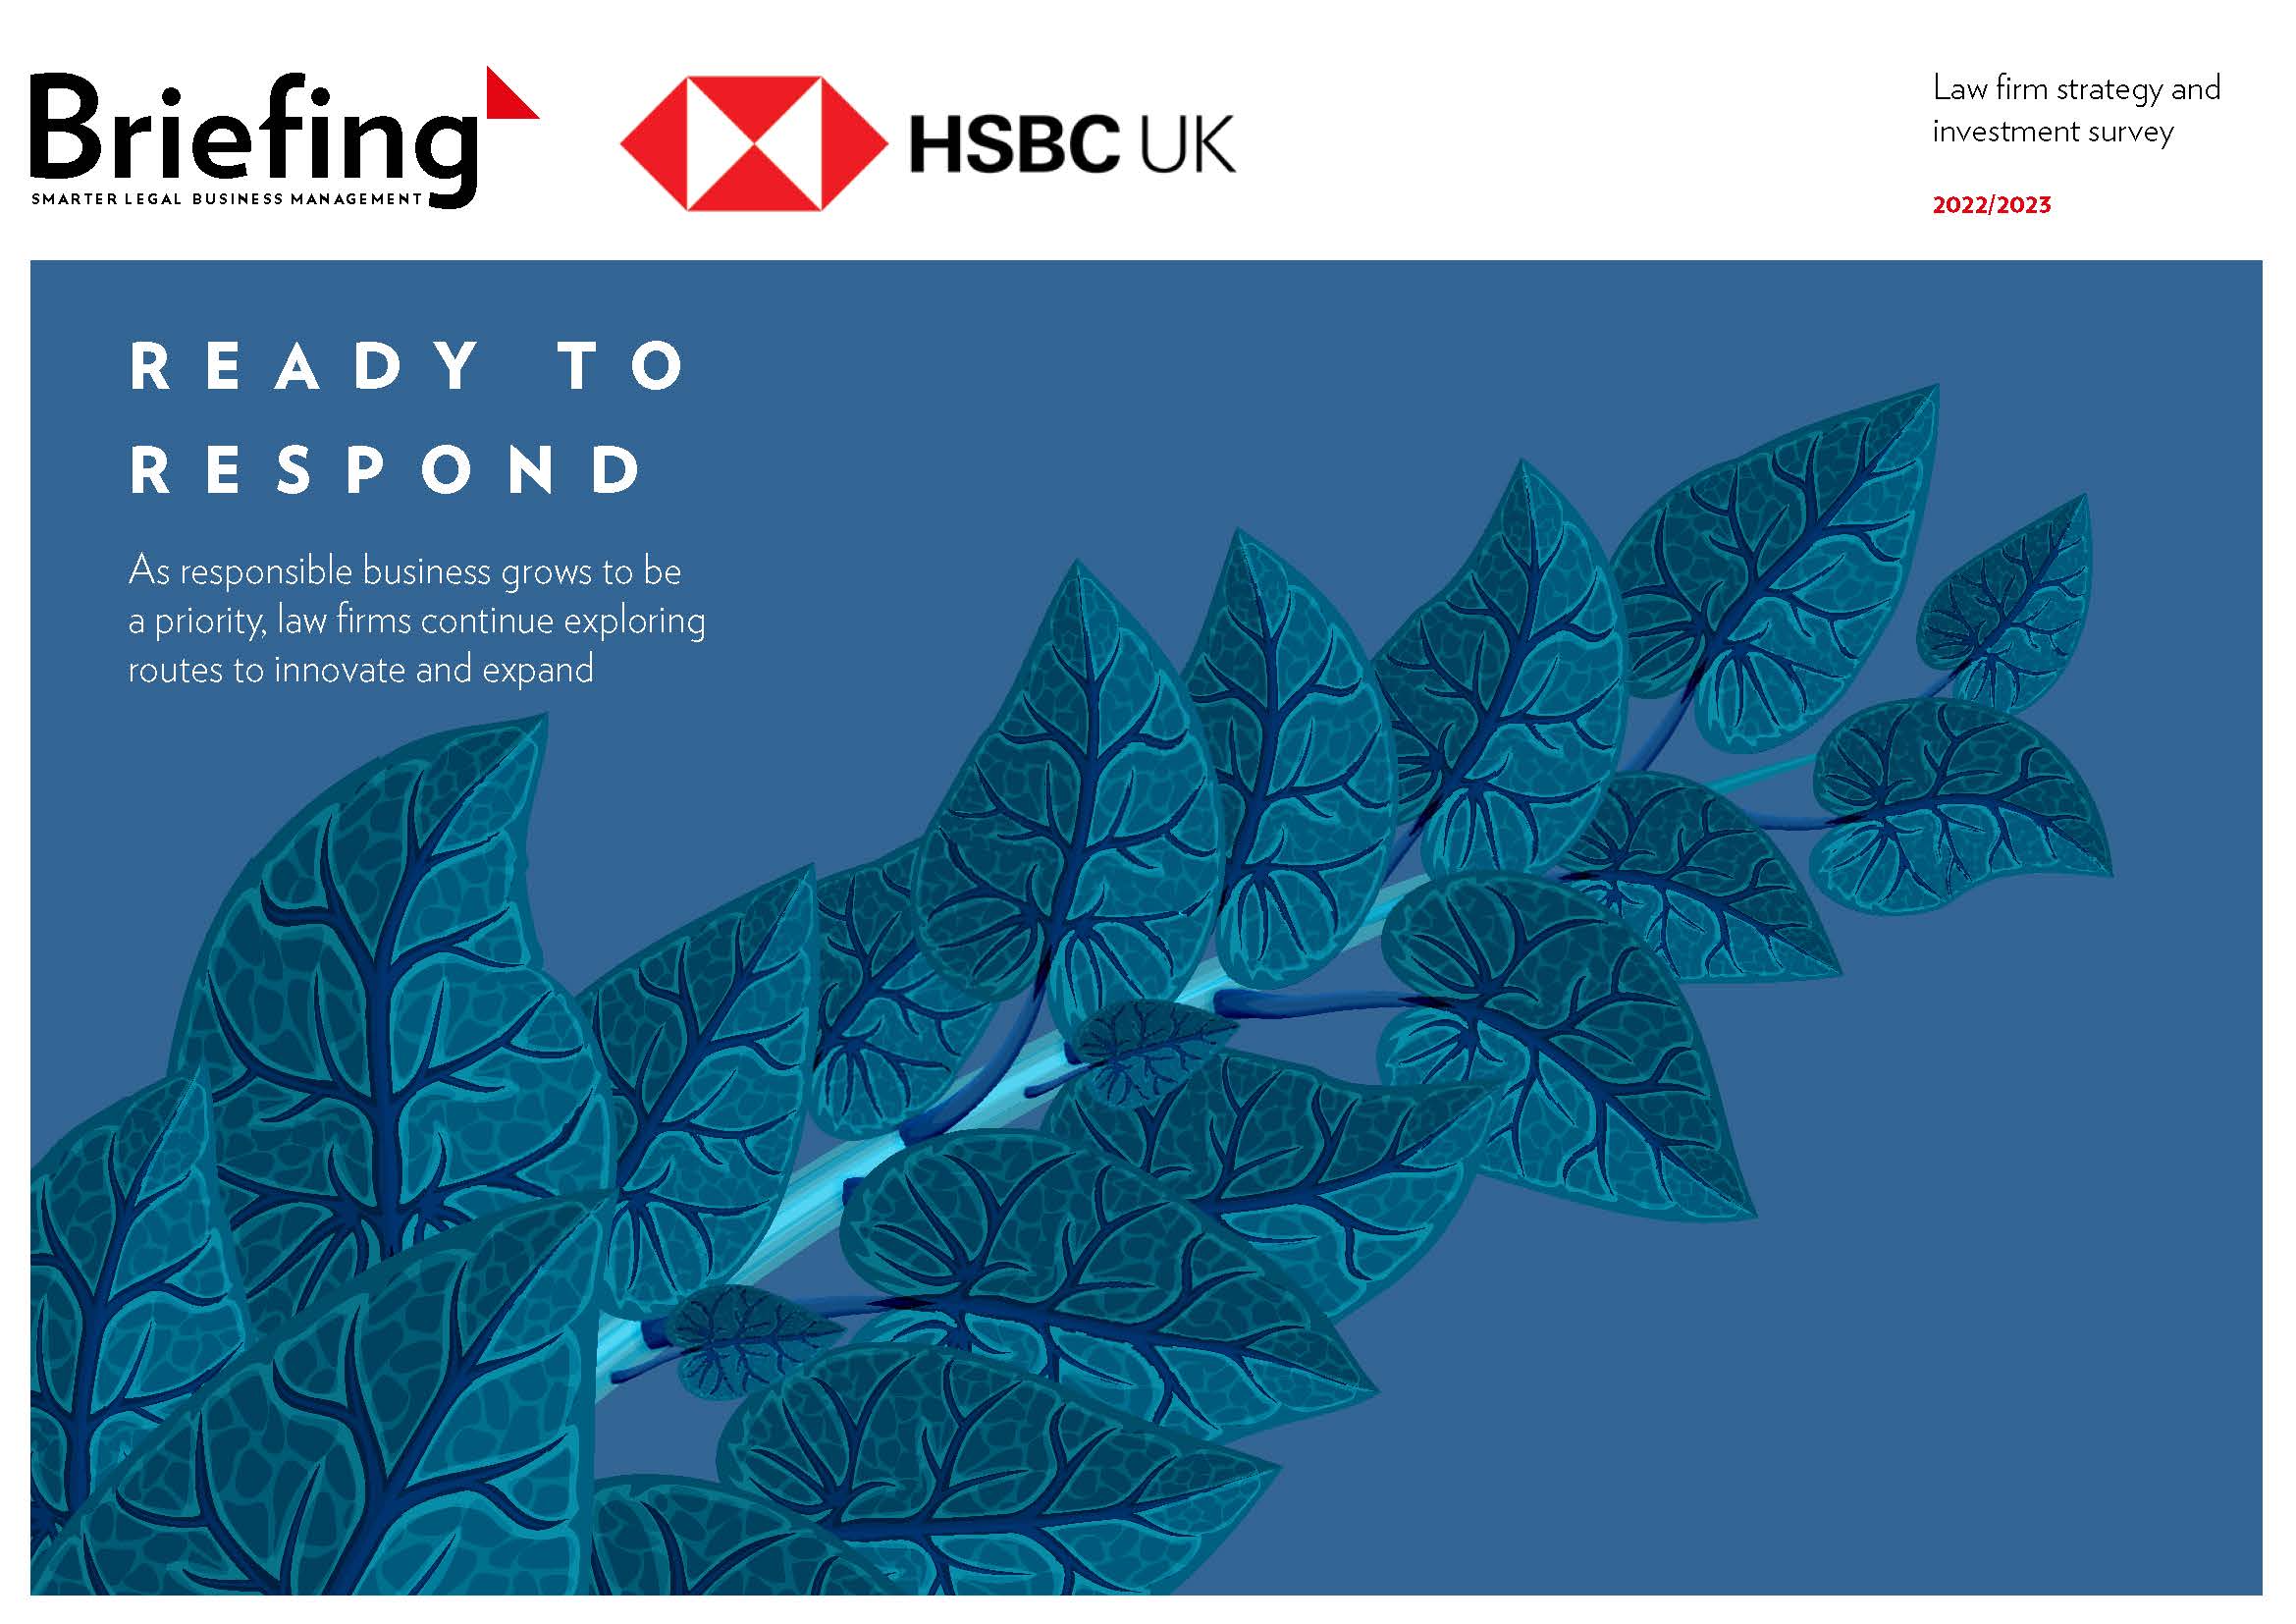 HSBC/Briefing law firm strategy survey 2022